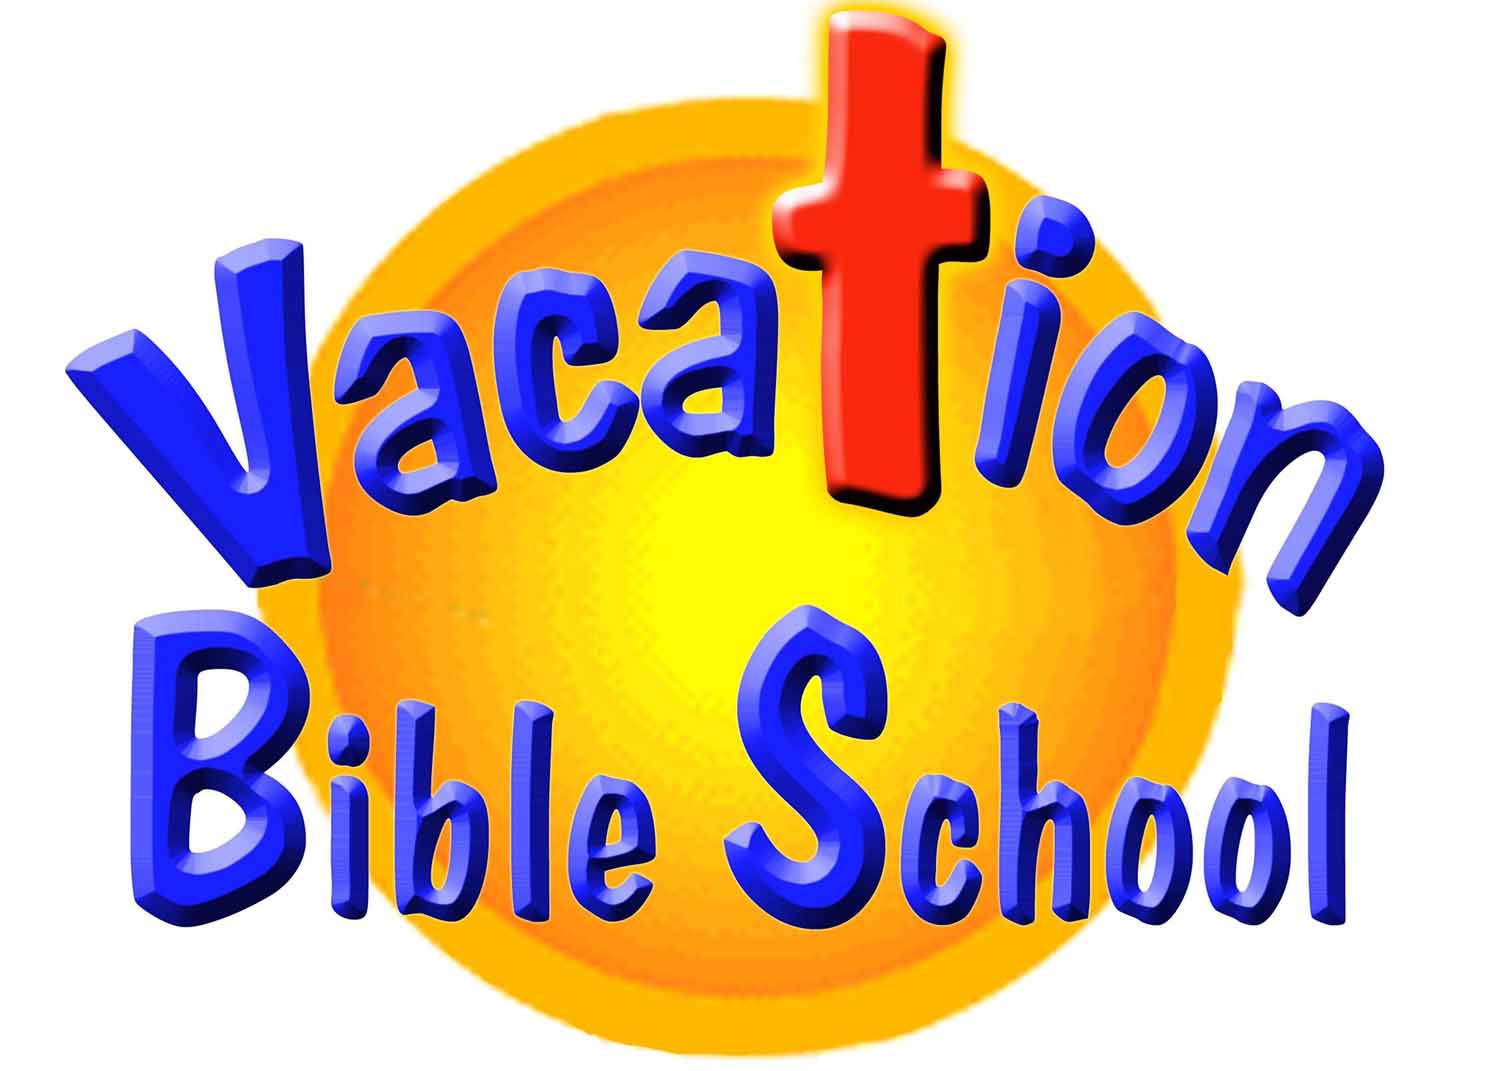 Free Vbs Registration Cliparts, Download Free Clip Art, Free.